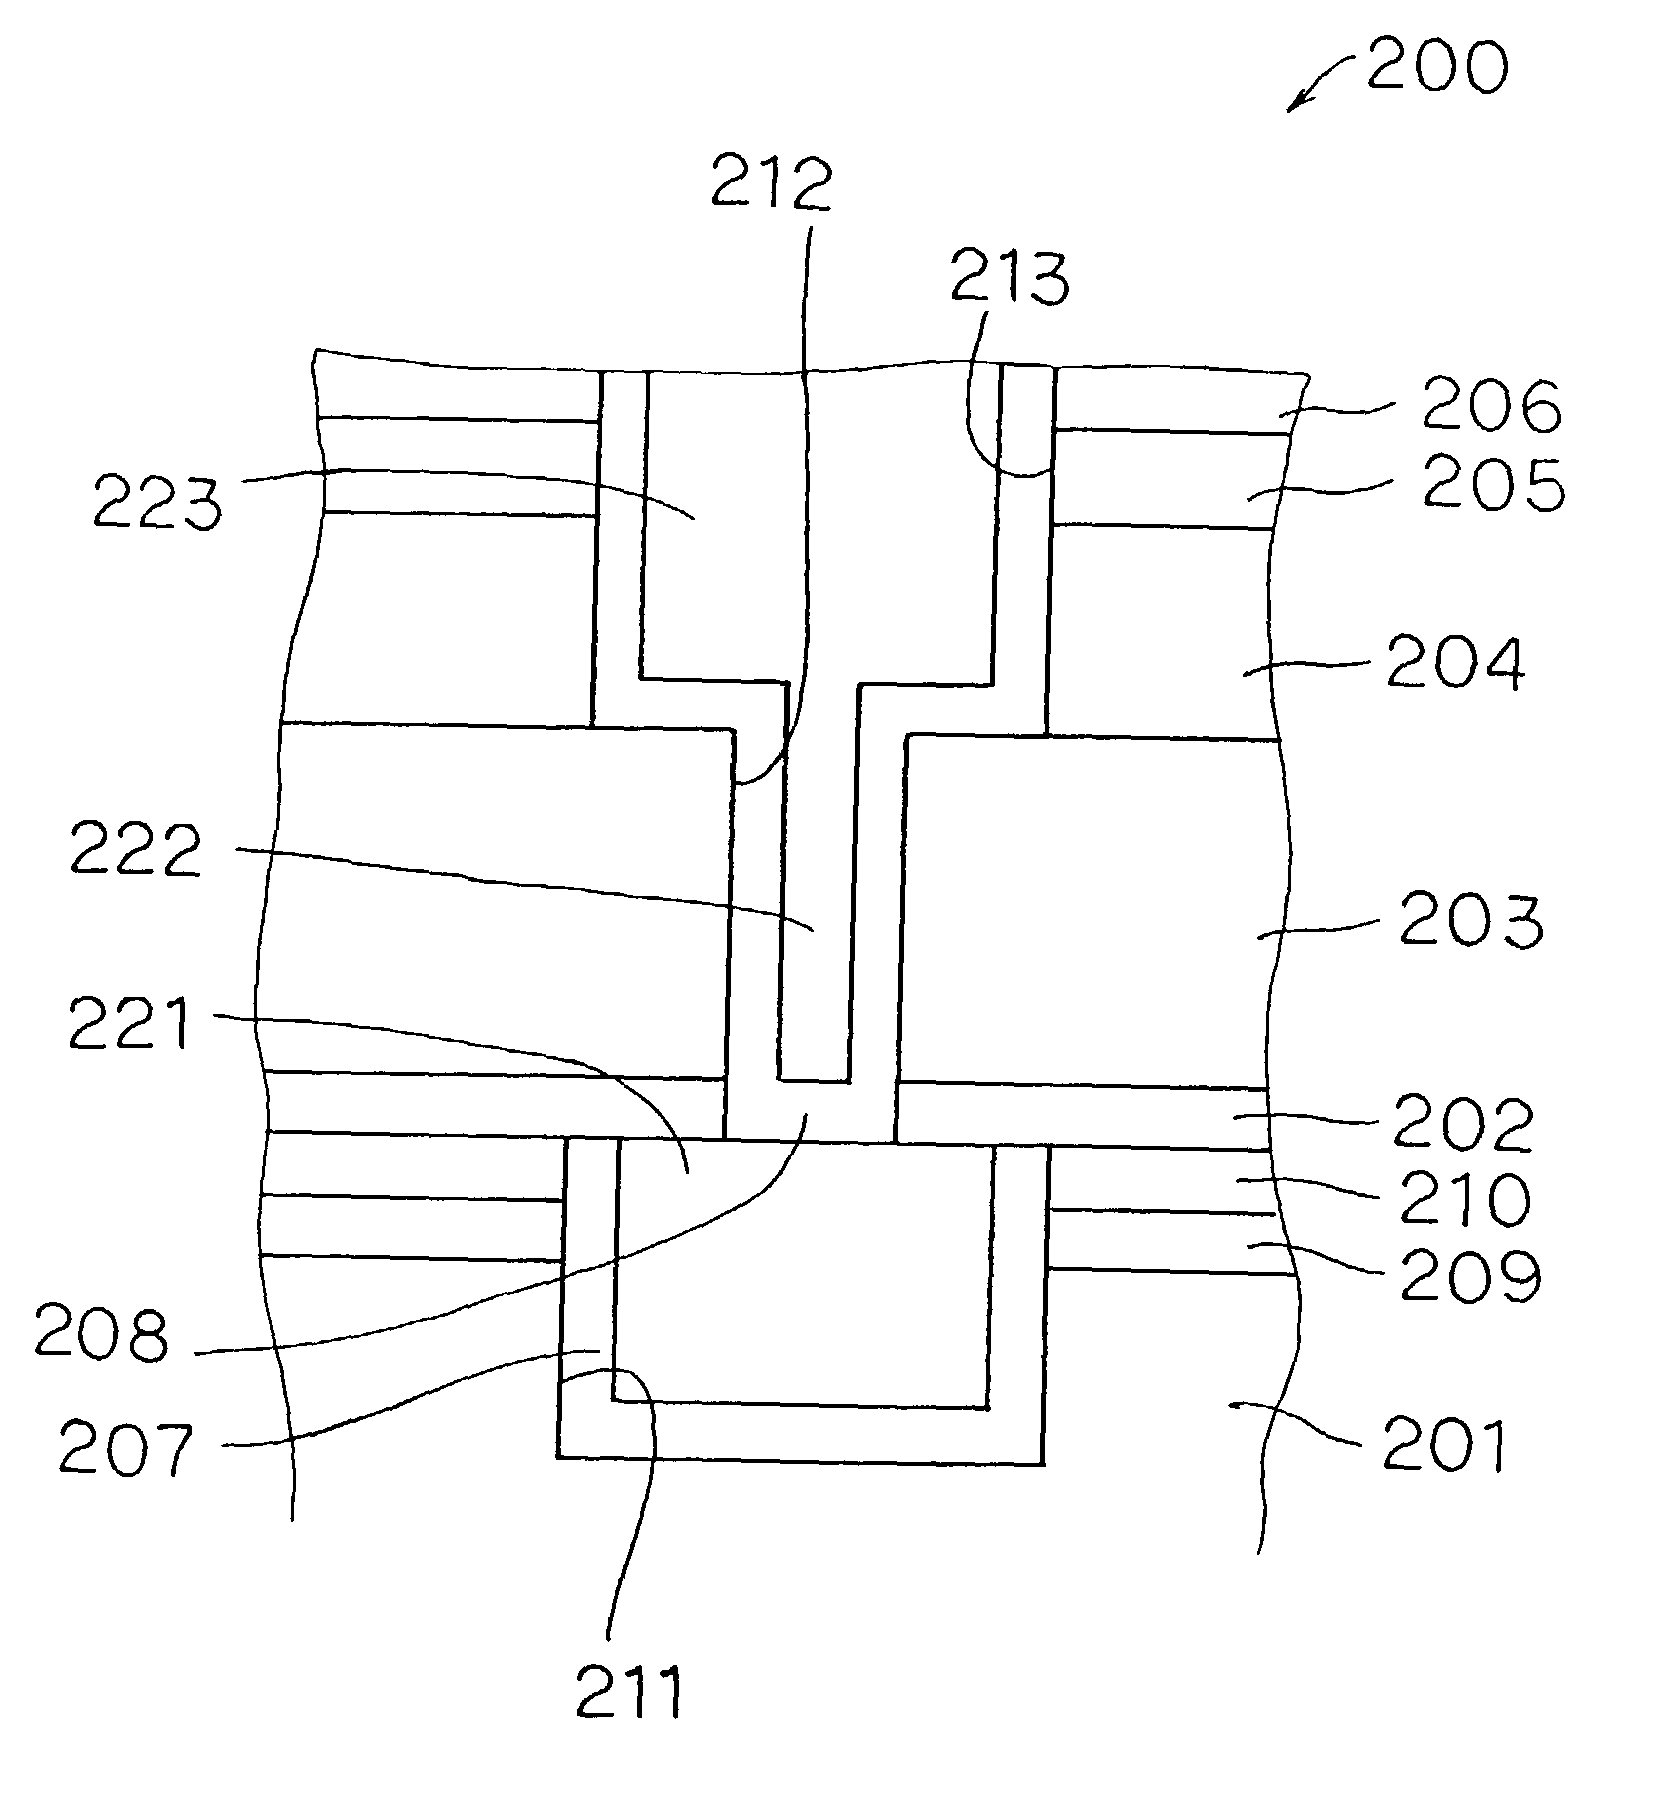 Dual damascene circuit with upper wiring and interconnect line positioned in regions formed as two layers including organic polymer layer and low-permittivity layer